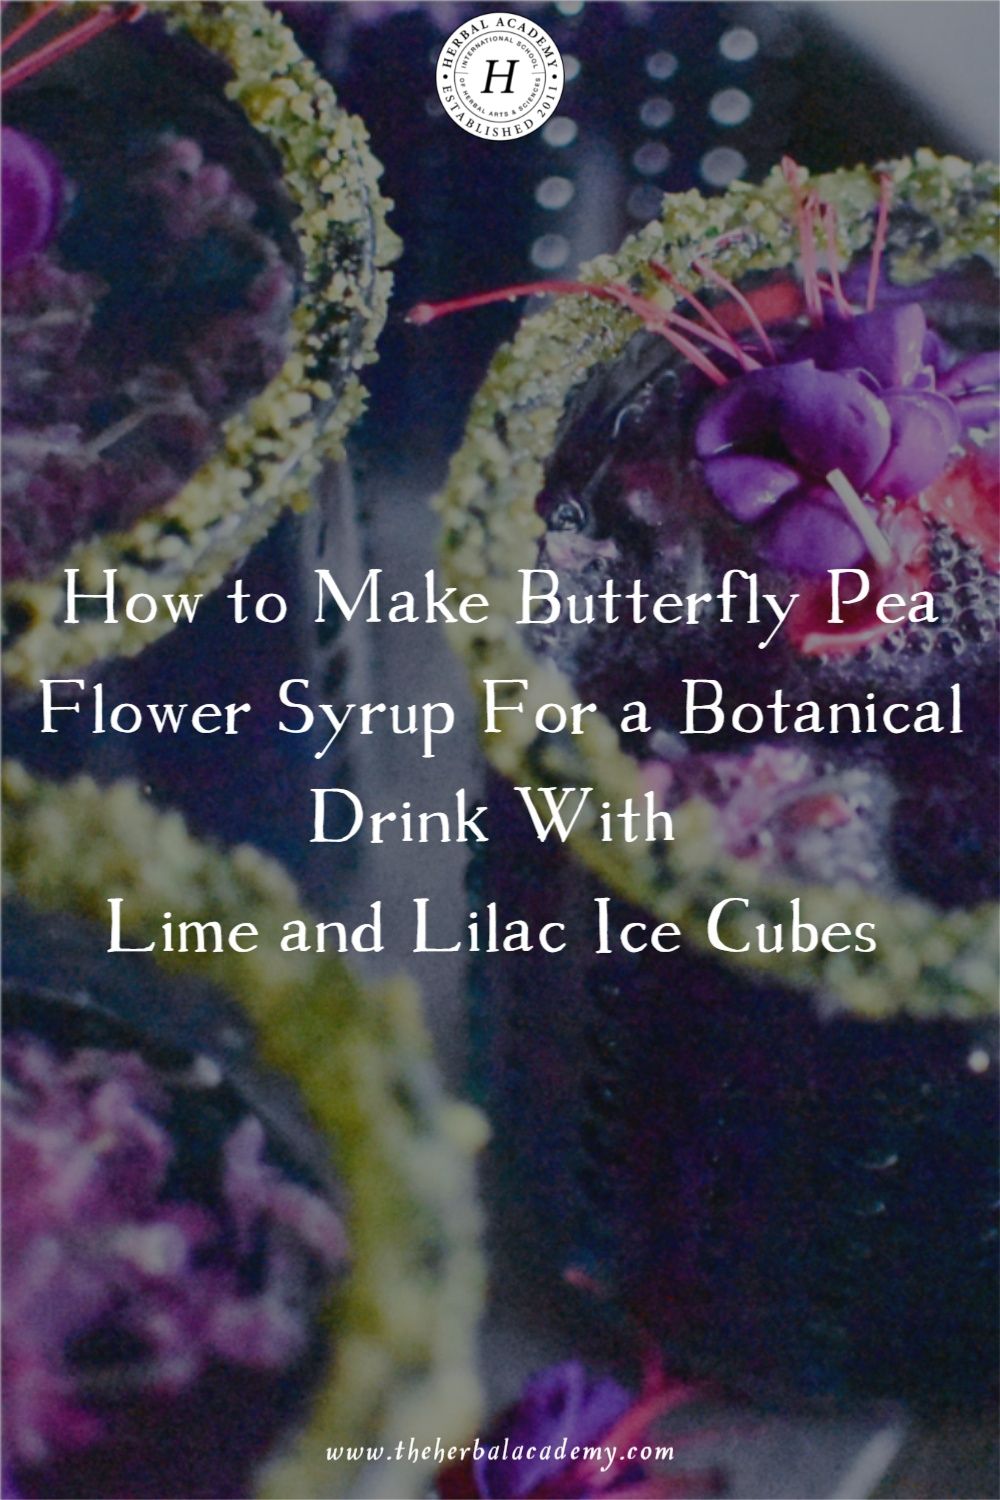 How to Make Butterfly Pea Flower Syrup For a Botanical Drink With Lime and Lilac Ice Cubes | Herbal Academy | Creating an herbal syrup with the brilliantly-hued butterfly pea flower is a perfect recipe to add to your summer drinks.